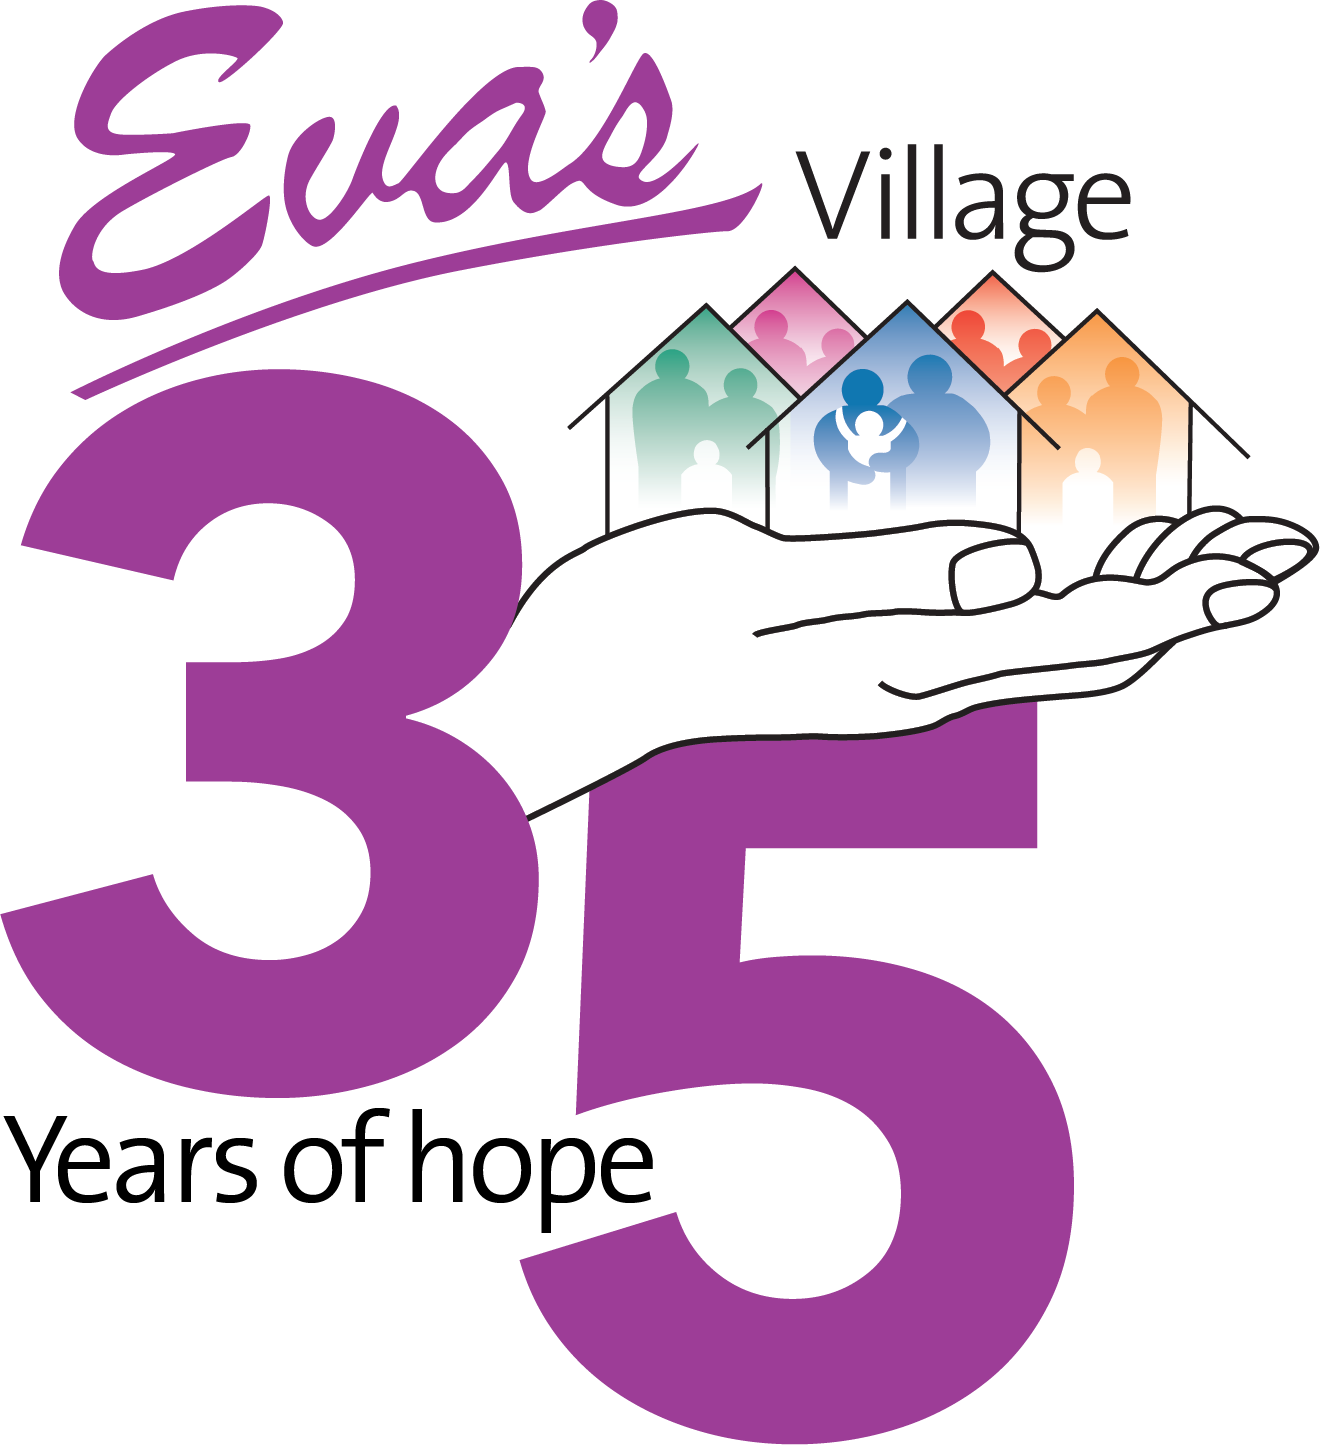 The mission of Eva's Village is to feed the hungry, shelter the homeless, treat the addicted and provide medical and dental care to the poor with respect for the human dignity of each individual